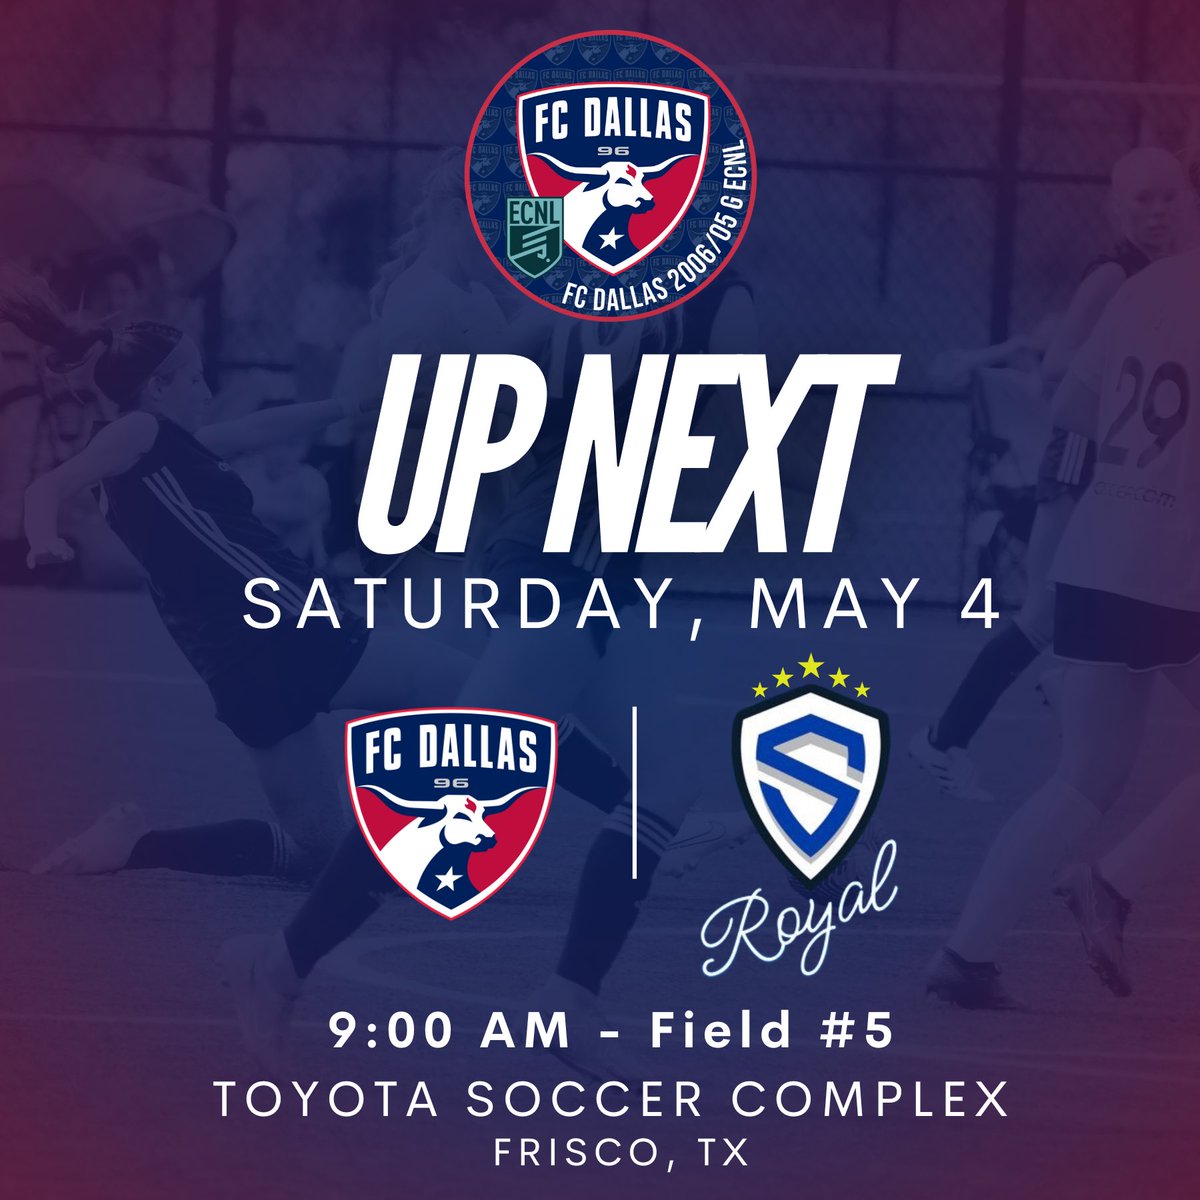 Only a few games left in our @ECNLgirls TX Conference regular season❗️This Saturday we host Sting Royal! #DTID #CEFHAI #HnH ⬇️ GAME DETAILS ⬇️ @FCDwomen | @TheECNL